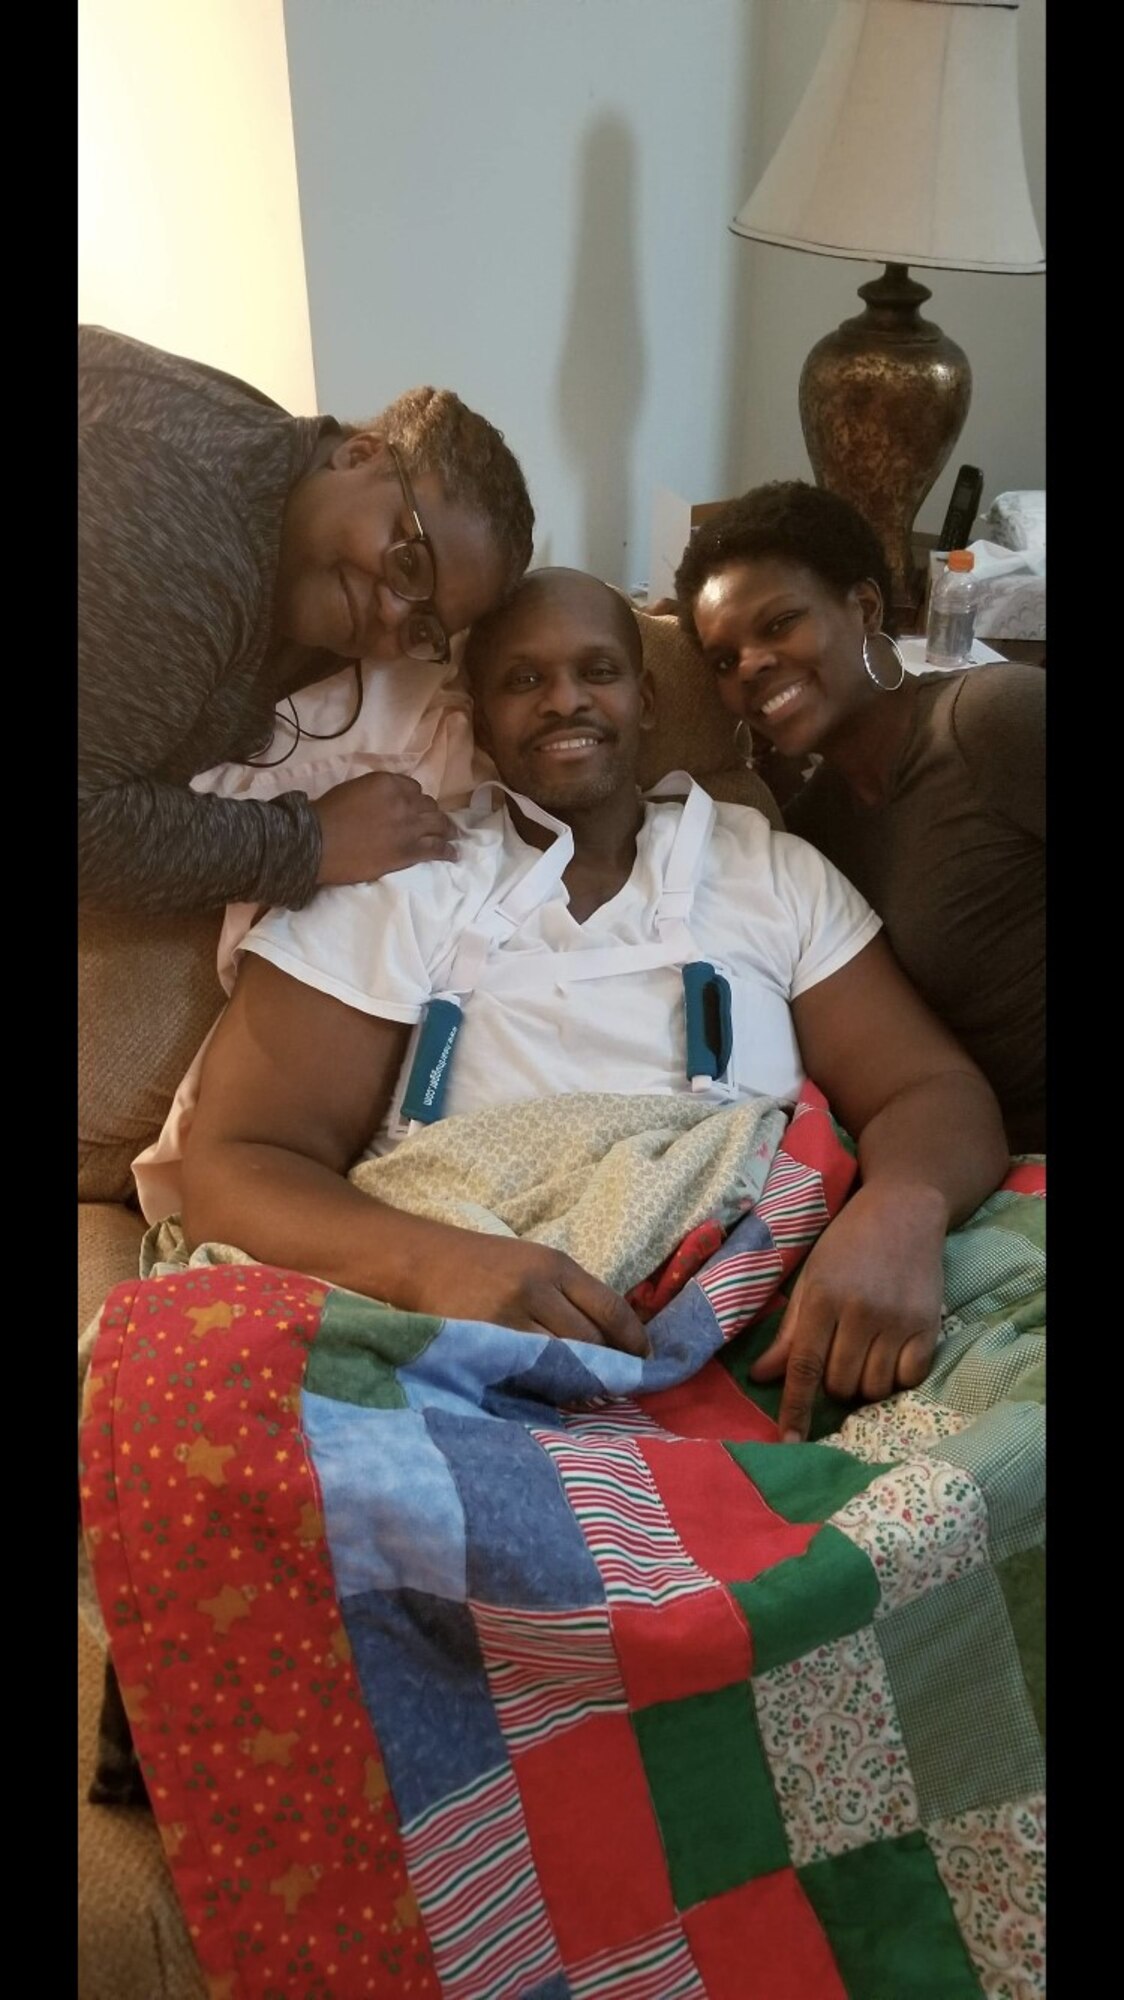 Jackie Bryant, left and Monique Todd, right, sisters of retired Master Sgt. and financial management specialist Daryl McFadden, Center, pose with McFadden after his triple bypass surgery. McFadden underwent heart surgery in January 2018 for obstruction of three vessel coronary arteries. After visiting his doctor for shortness of breath, test results showed his heart had 70-90 percent blockage. (Courtesy photo)